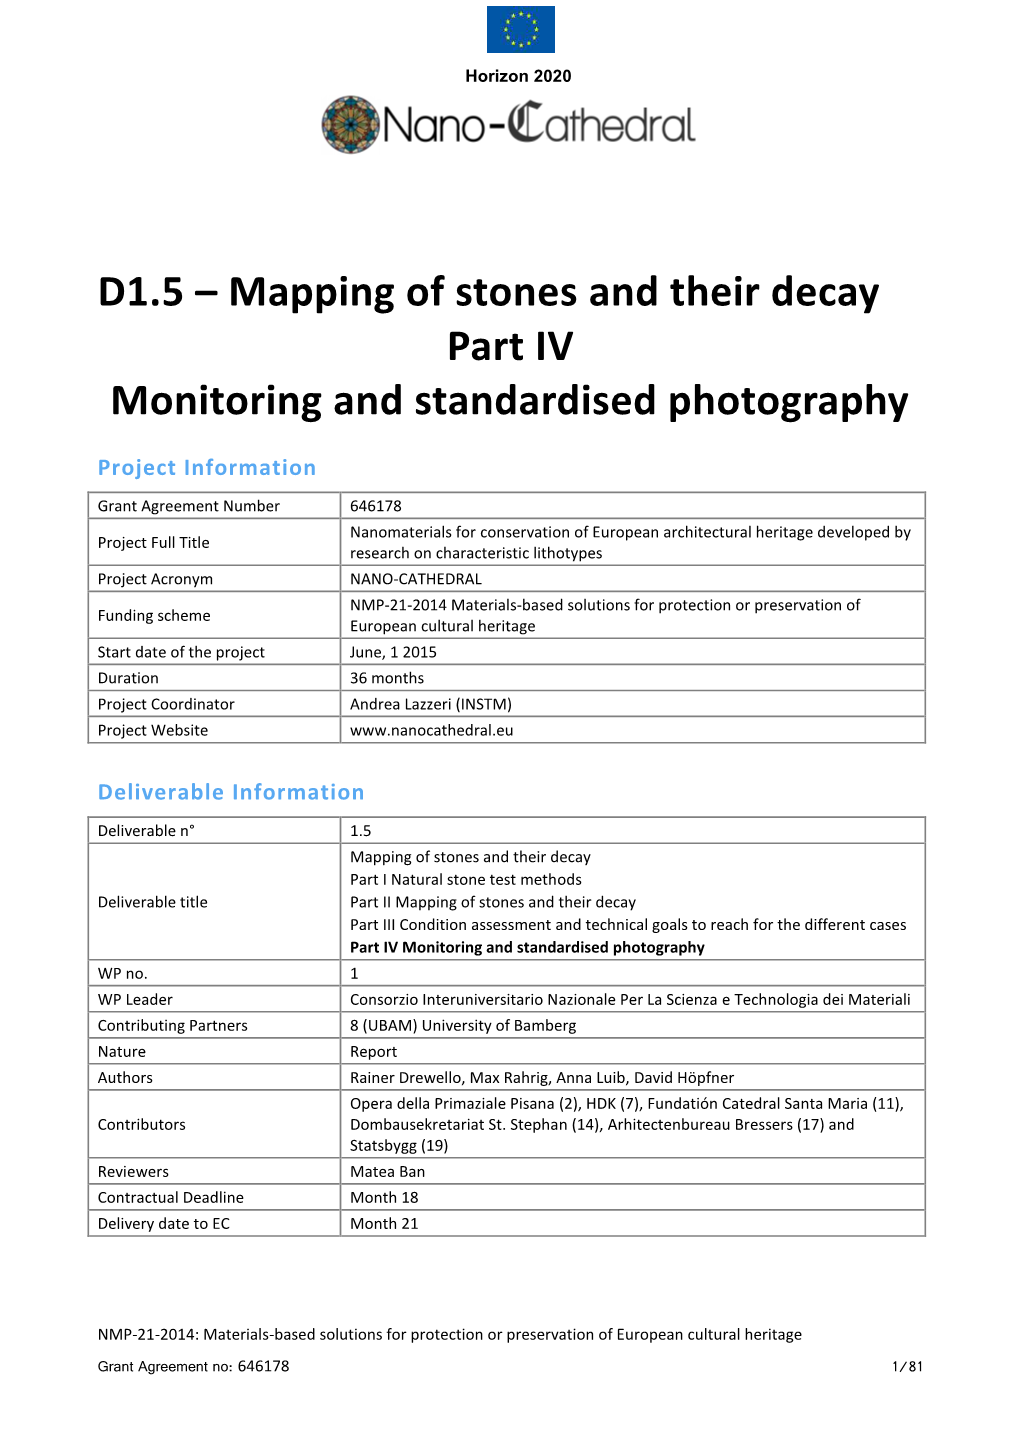 1.5 Monitoring and Standardized Photography